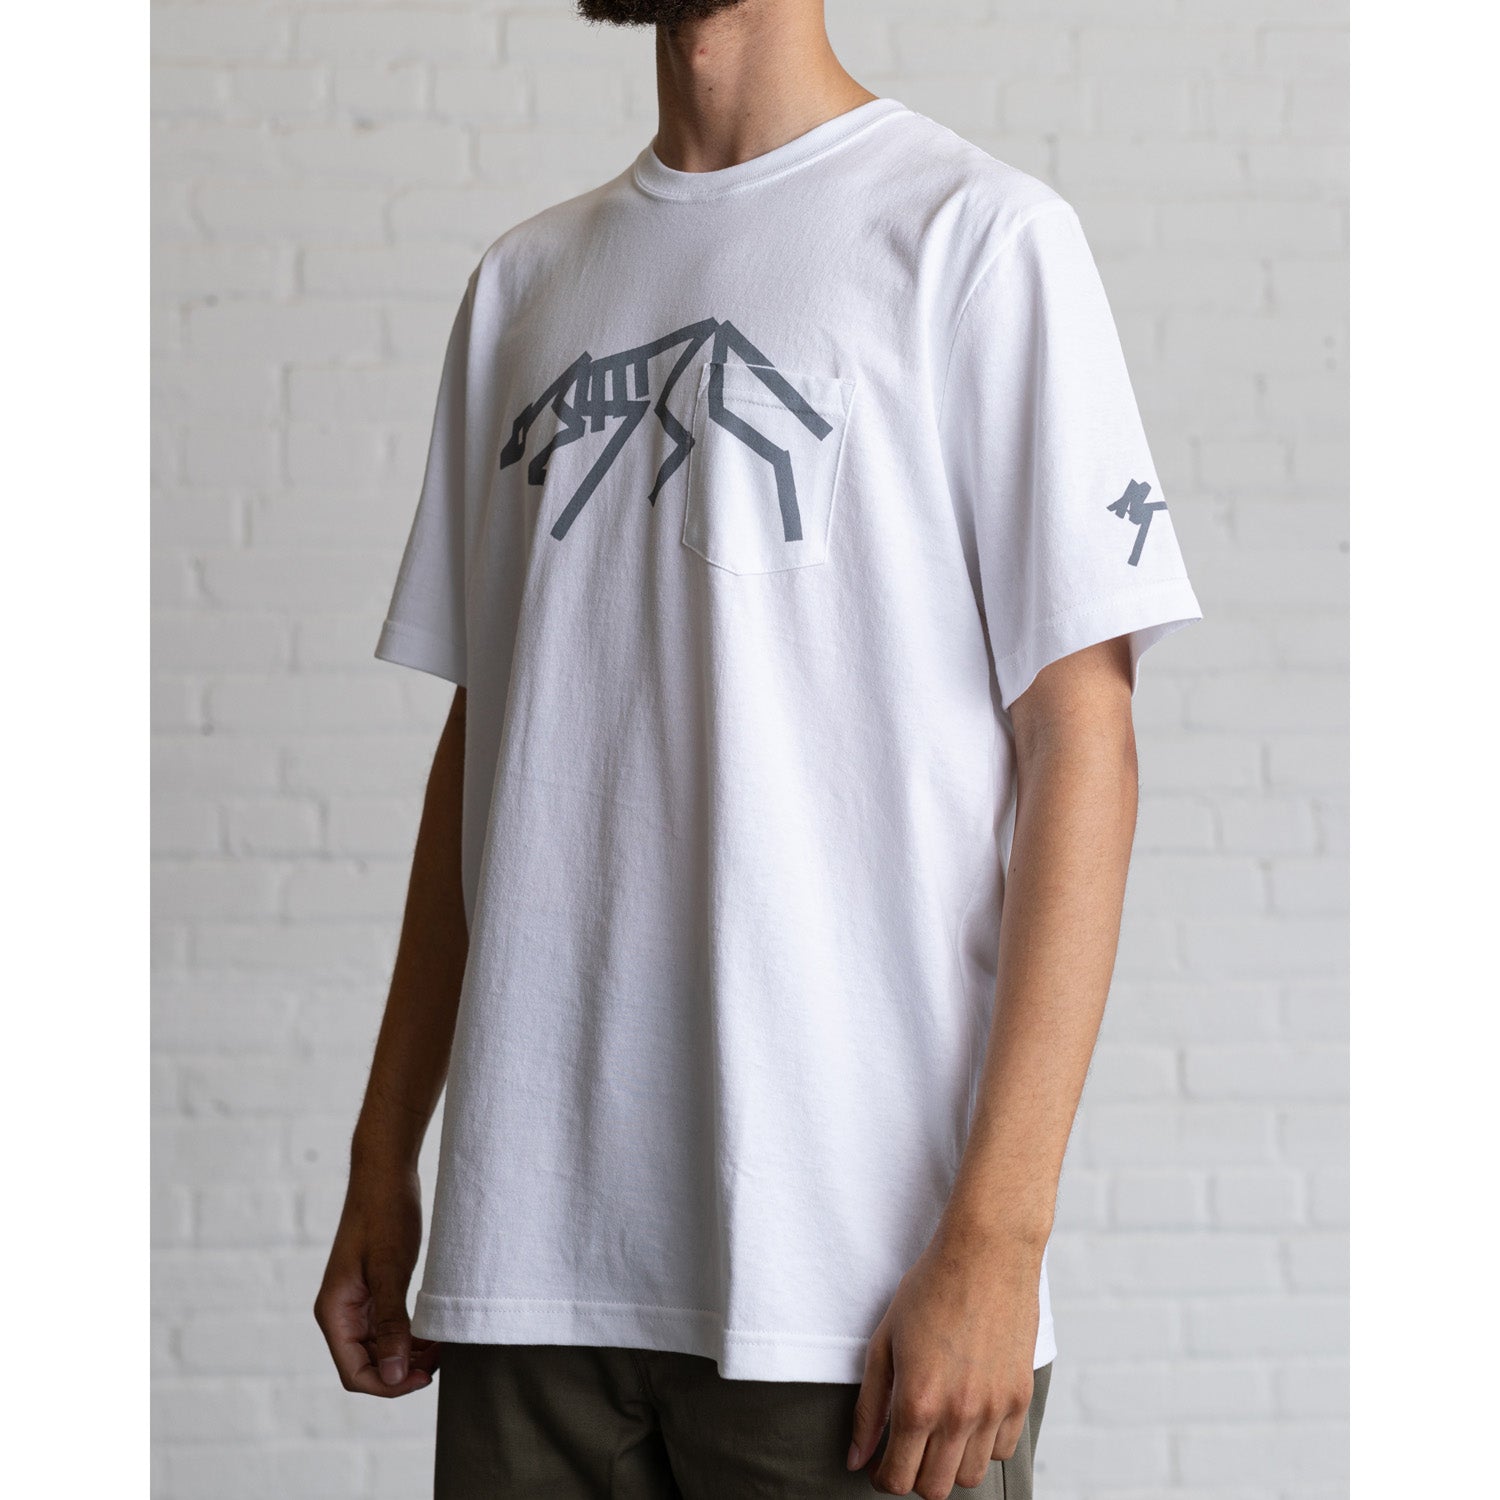 Raised By Wolves AG Stalk Pocket Tee White - T-SHIRTS - Canada